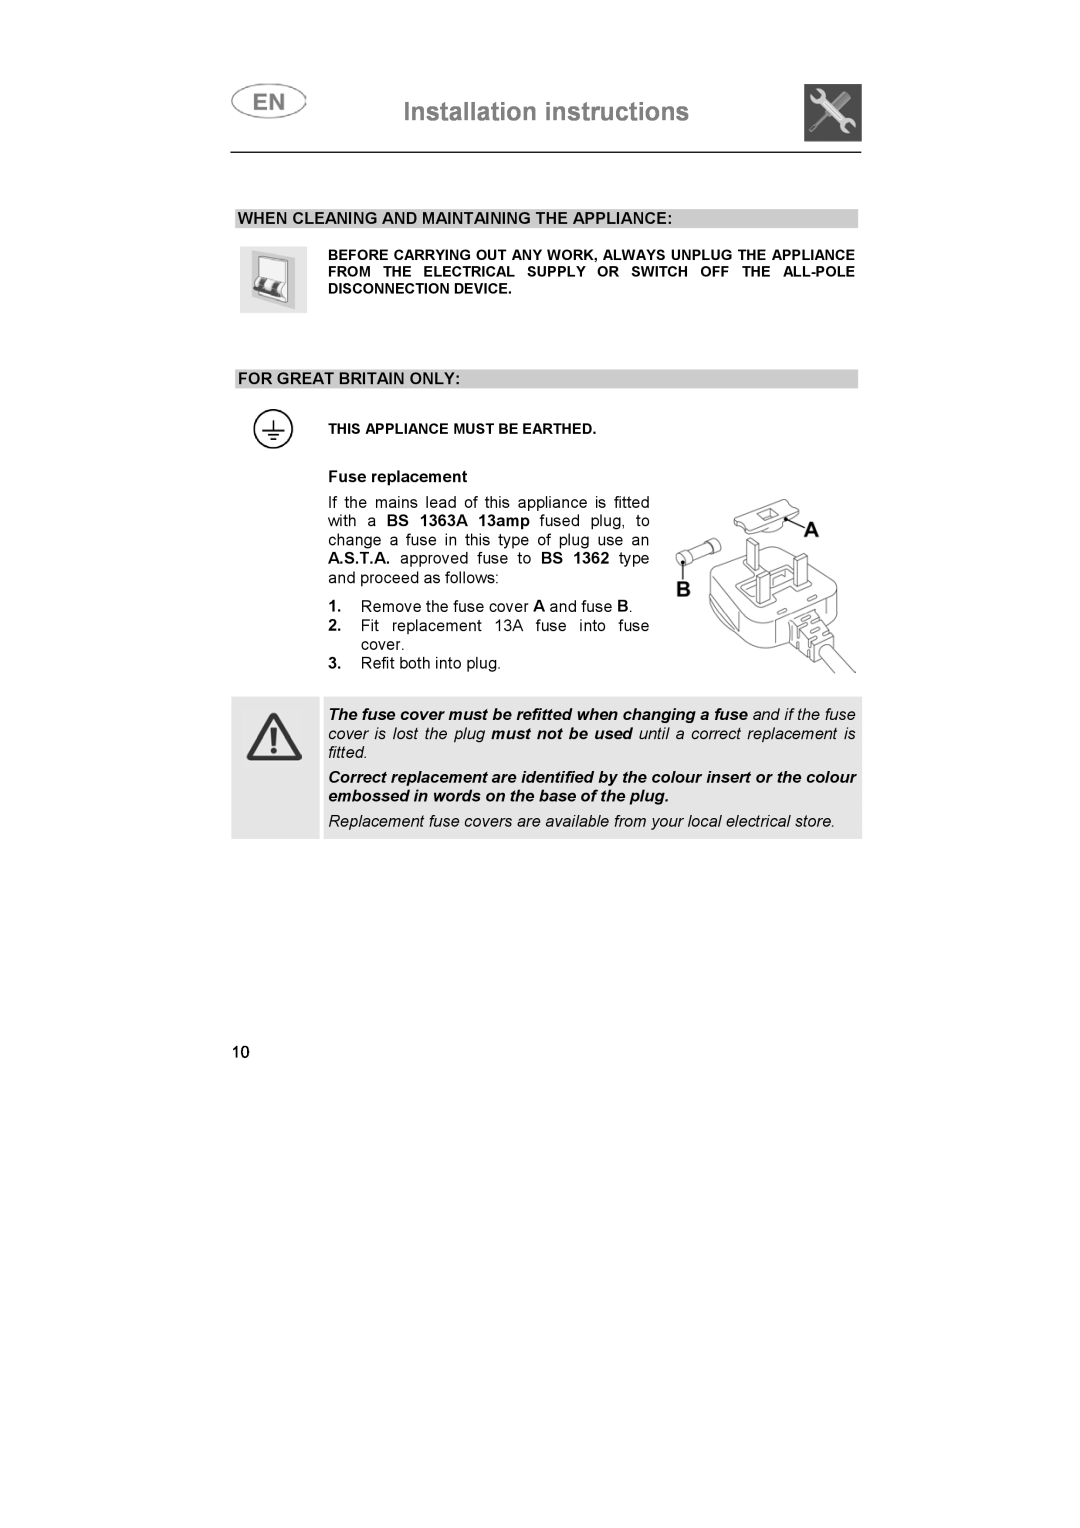 Smeg ST693-1 Installation instructions, When Cleaning And Maintaining The Appliance, For Great Britain Only 